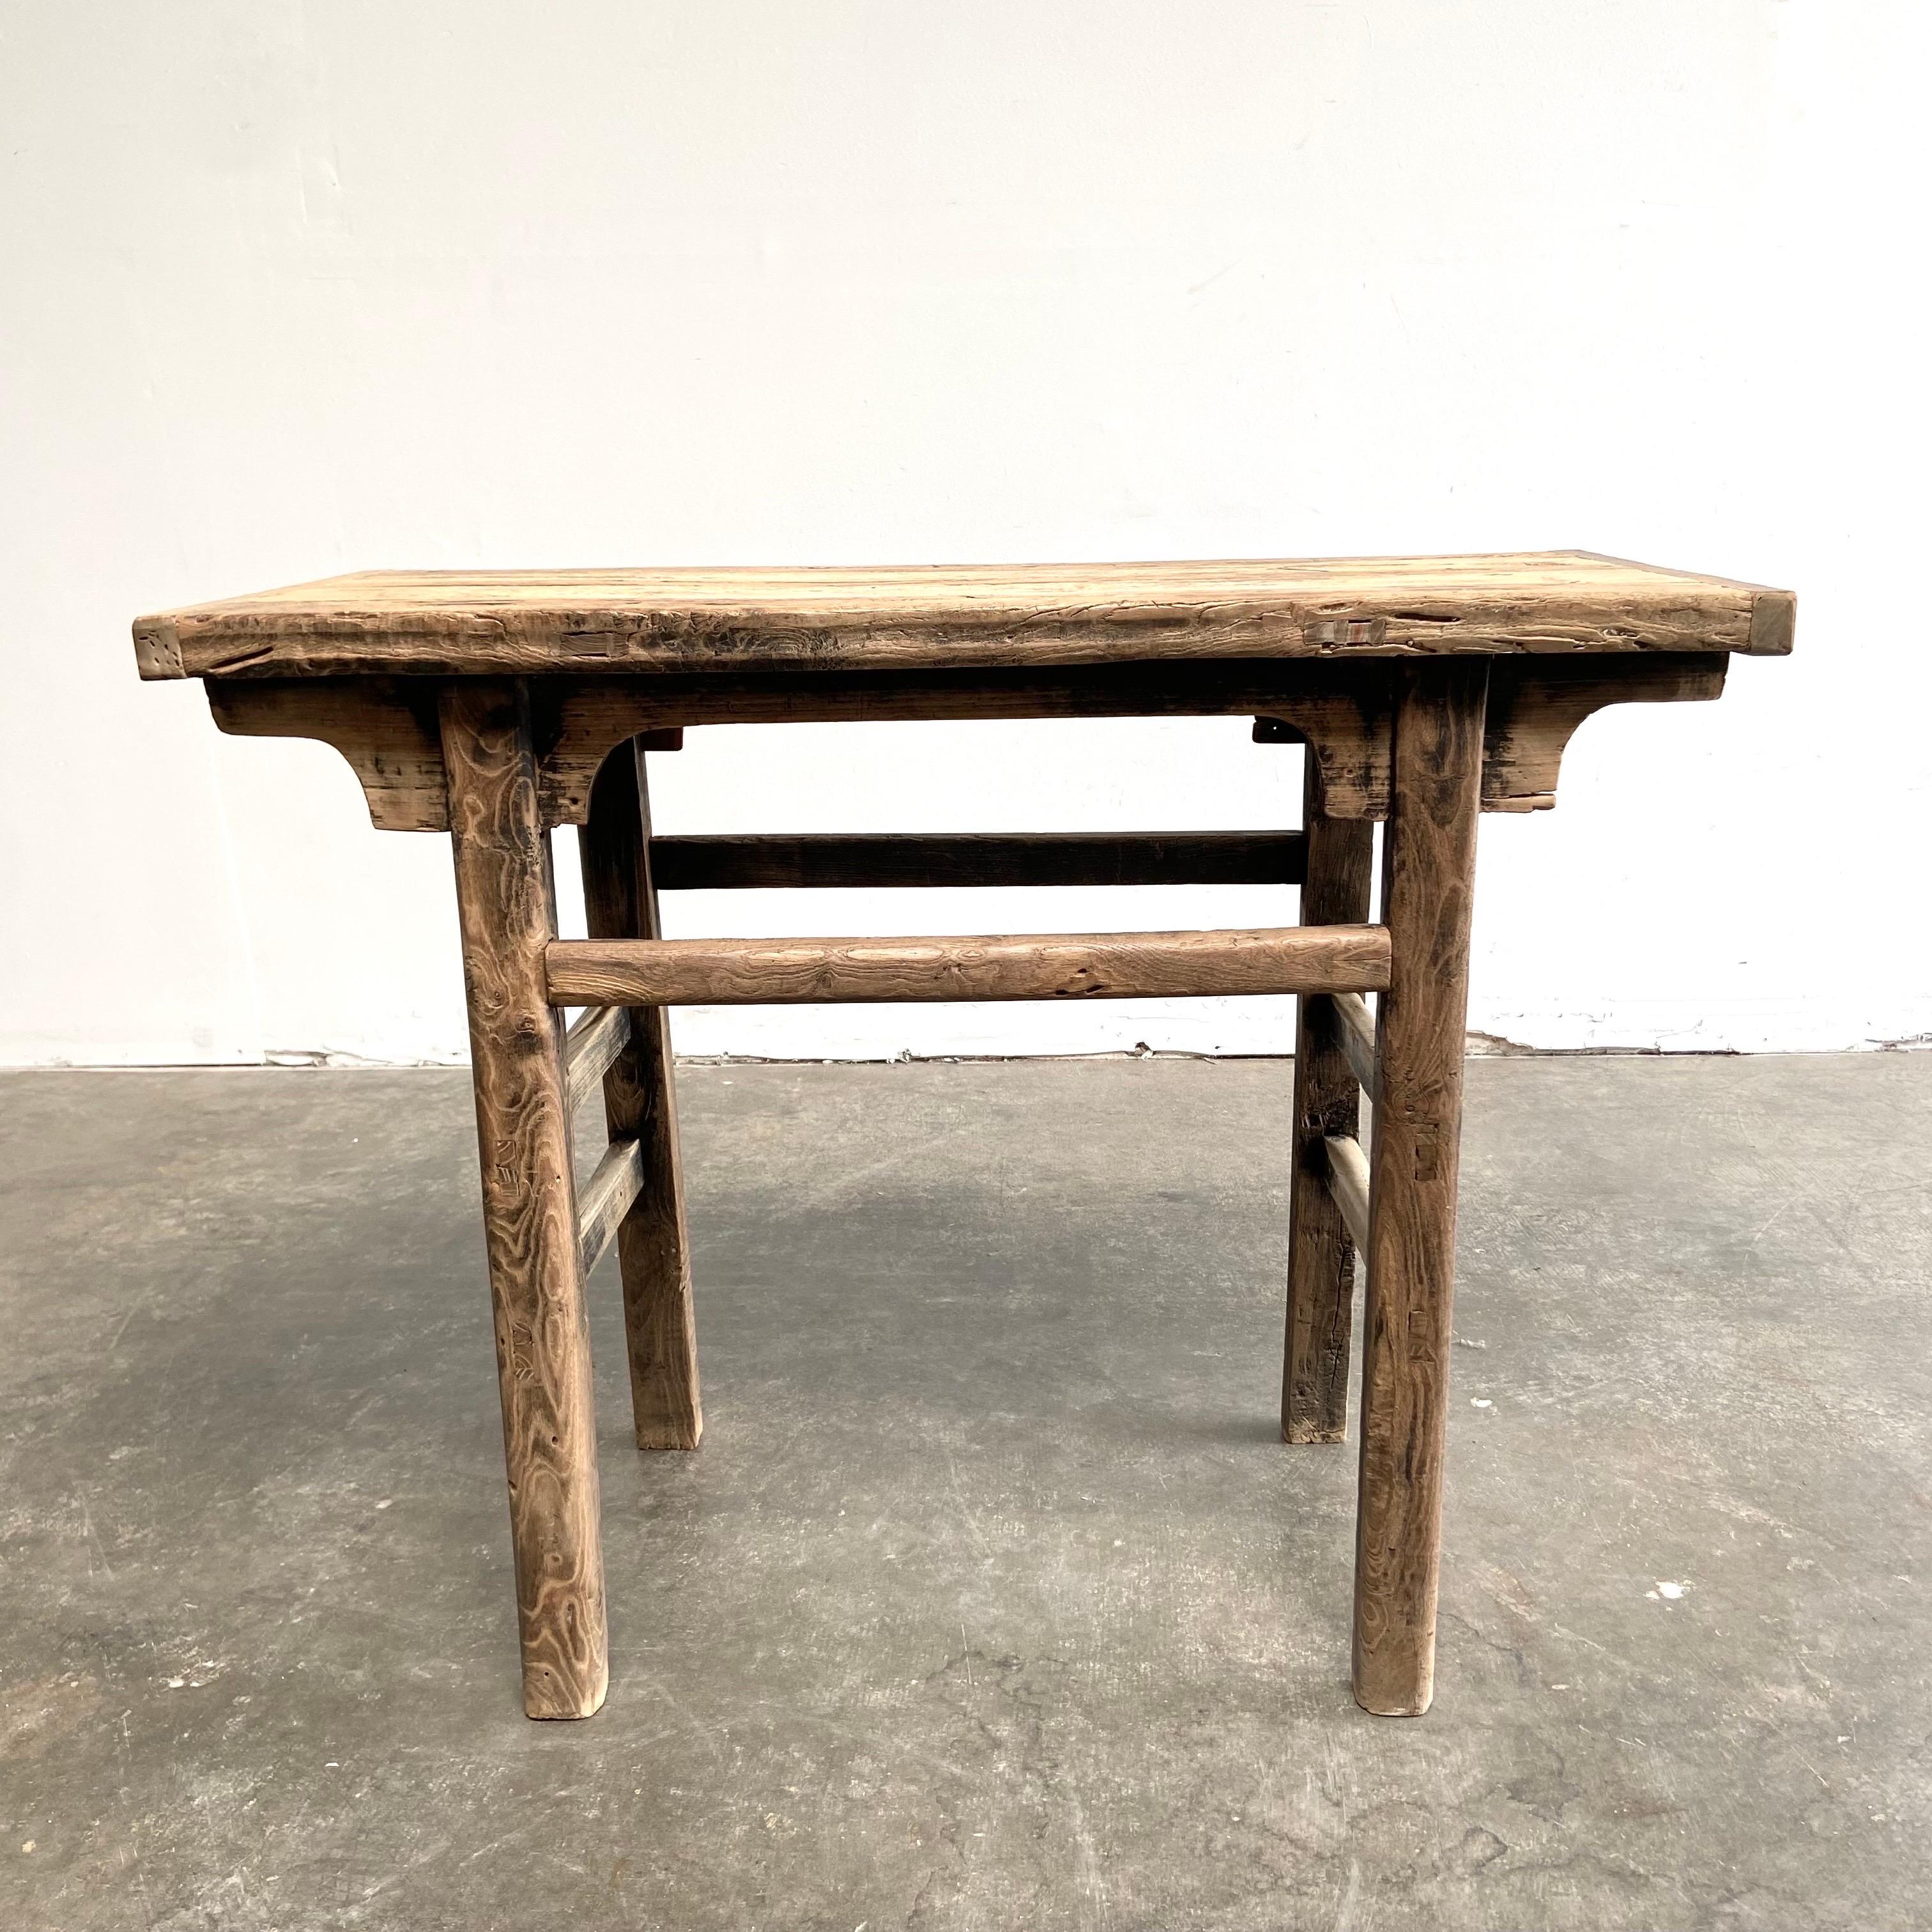 Vintage Antique Elm Wood Console Table Made from Vintage reclaimed elm wood. Beautiful antique patina, with weathering and age, these are solid and sturdy ready for daily use, use as a entry table, sofa table or console in a dining room. Great in a